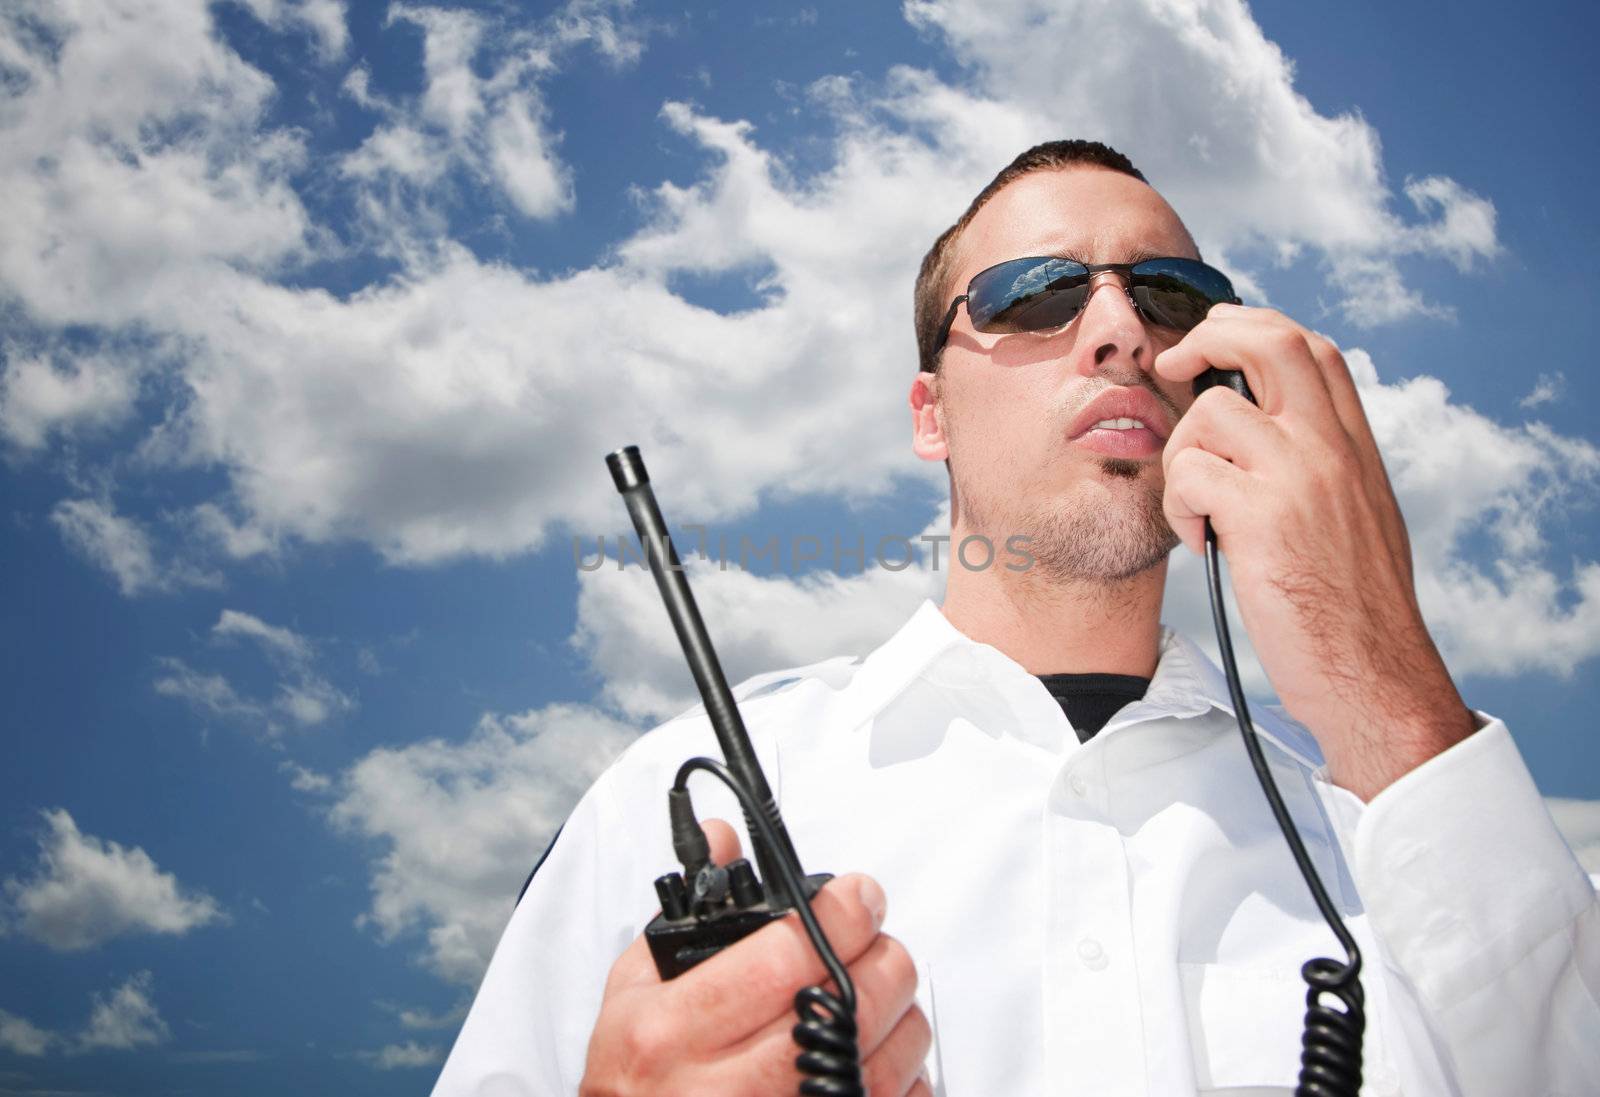 Security guard using hand-held radio for communication